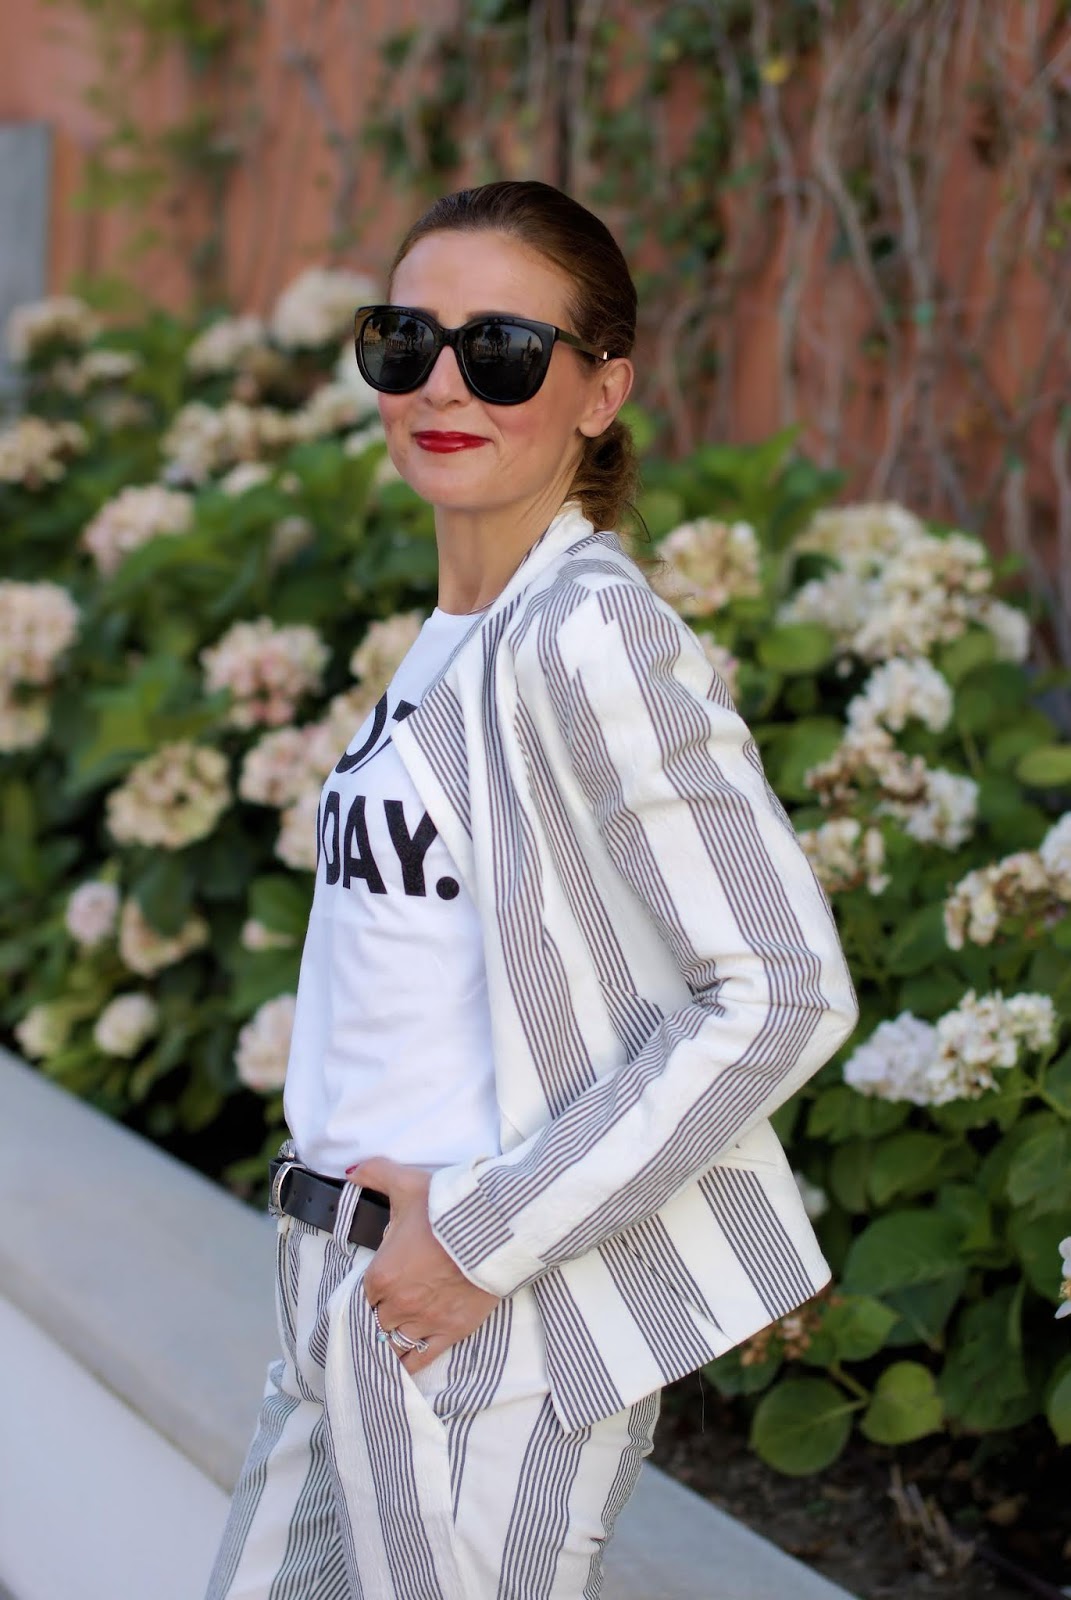 Not today: black and white striped suit on Fashion and Cookies fashion blog, fashion blogger style